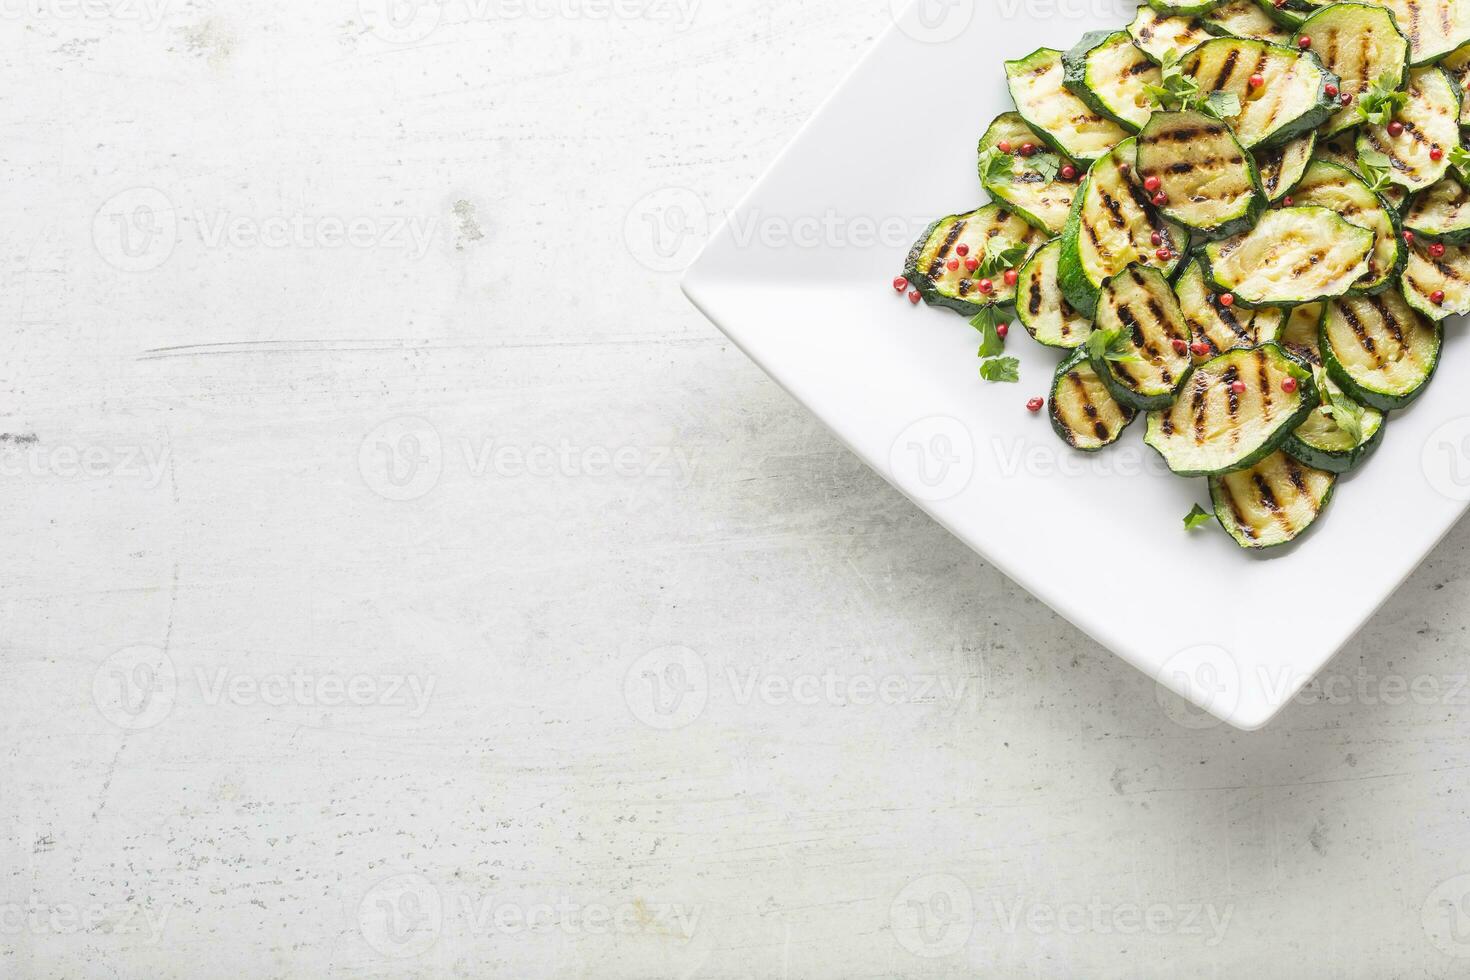 Zucchini. Grilled zucchini with red spice on white plate photo